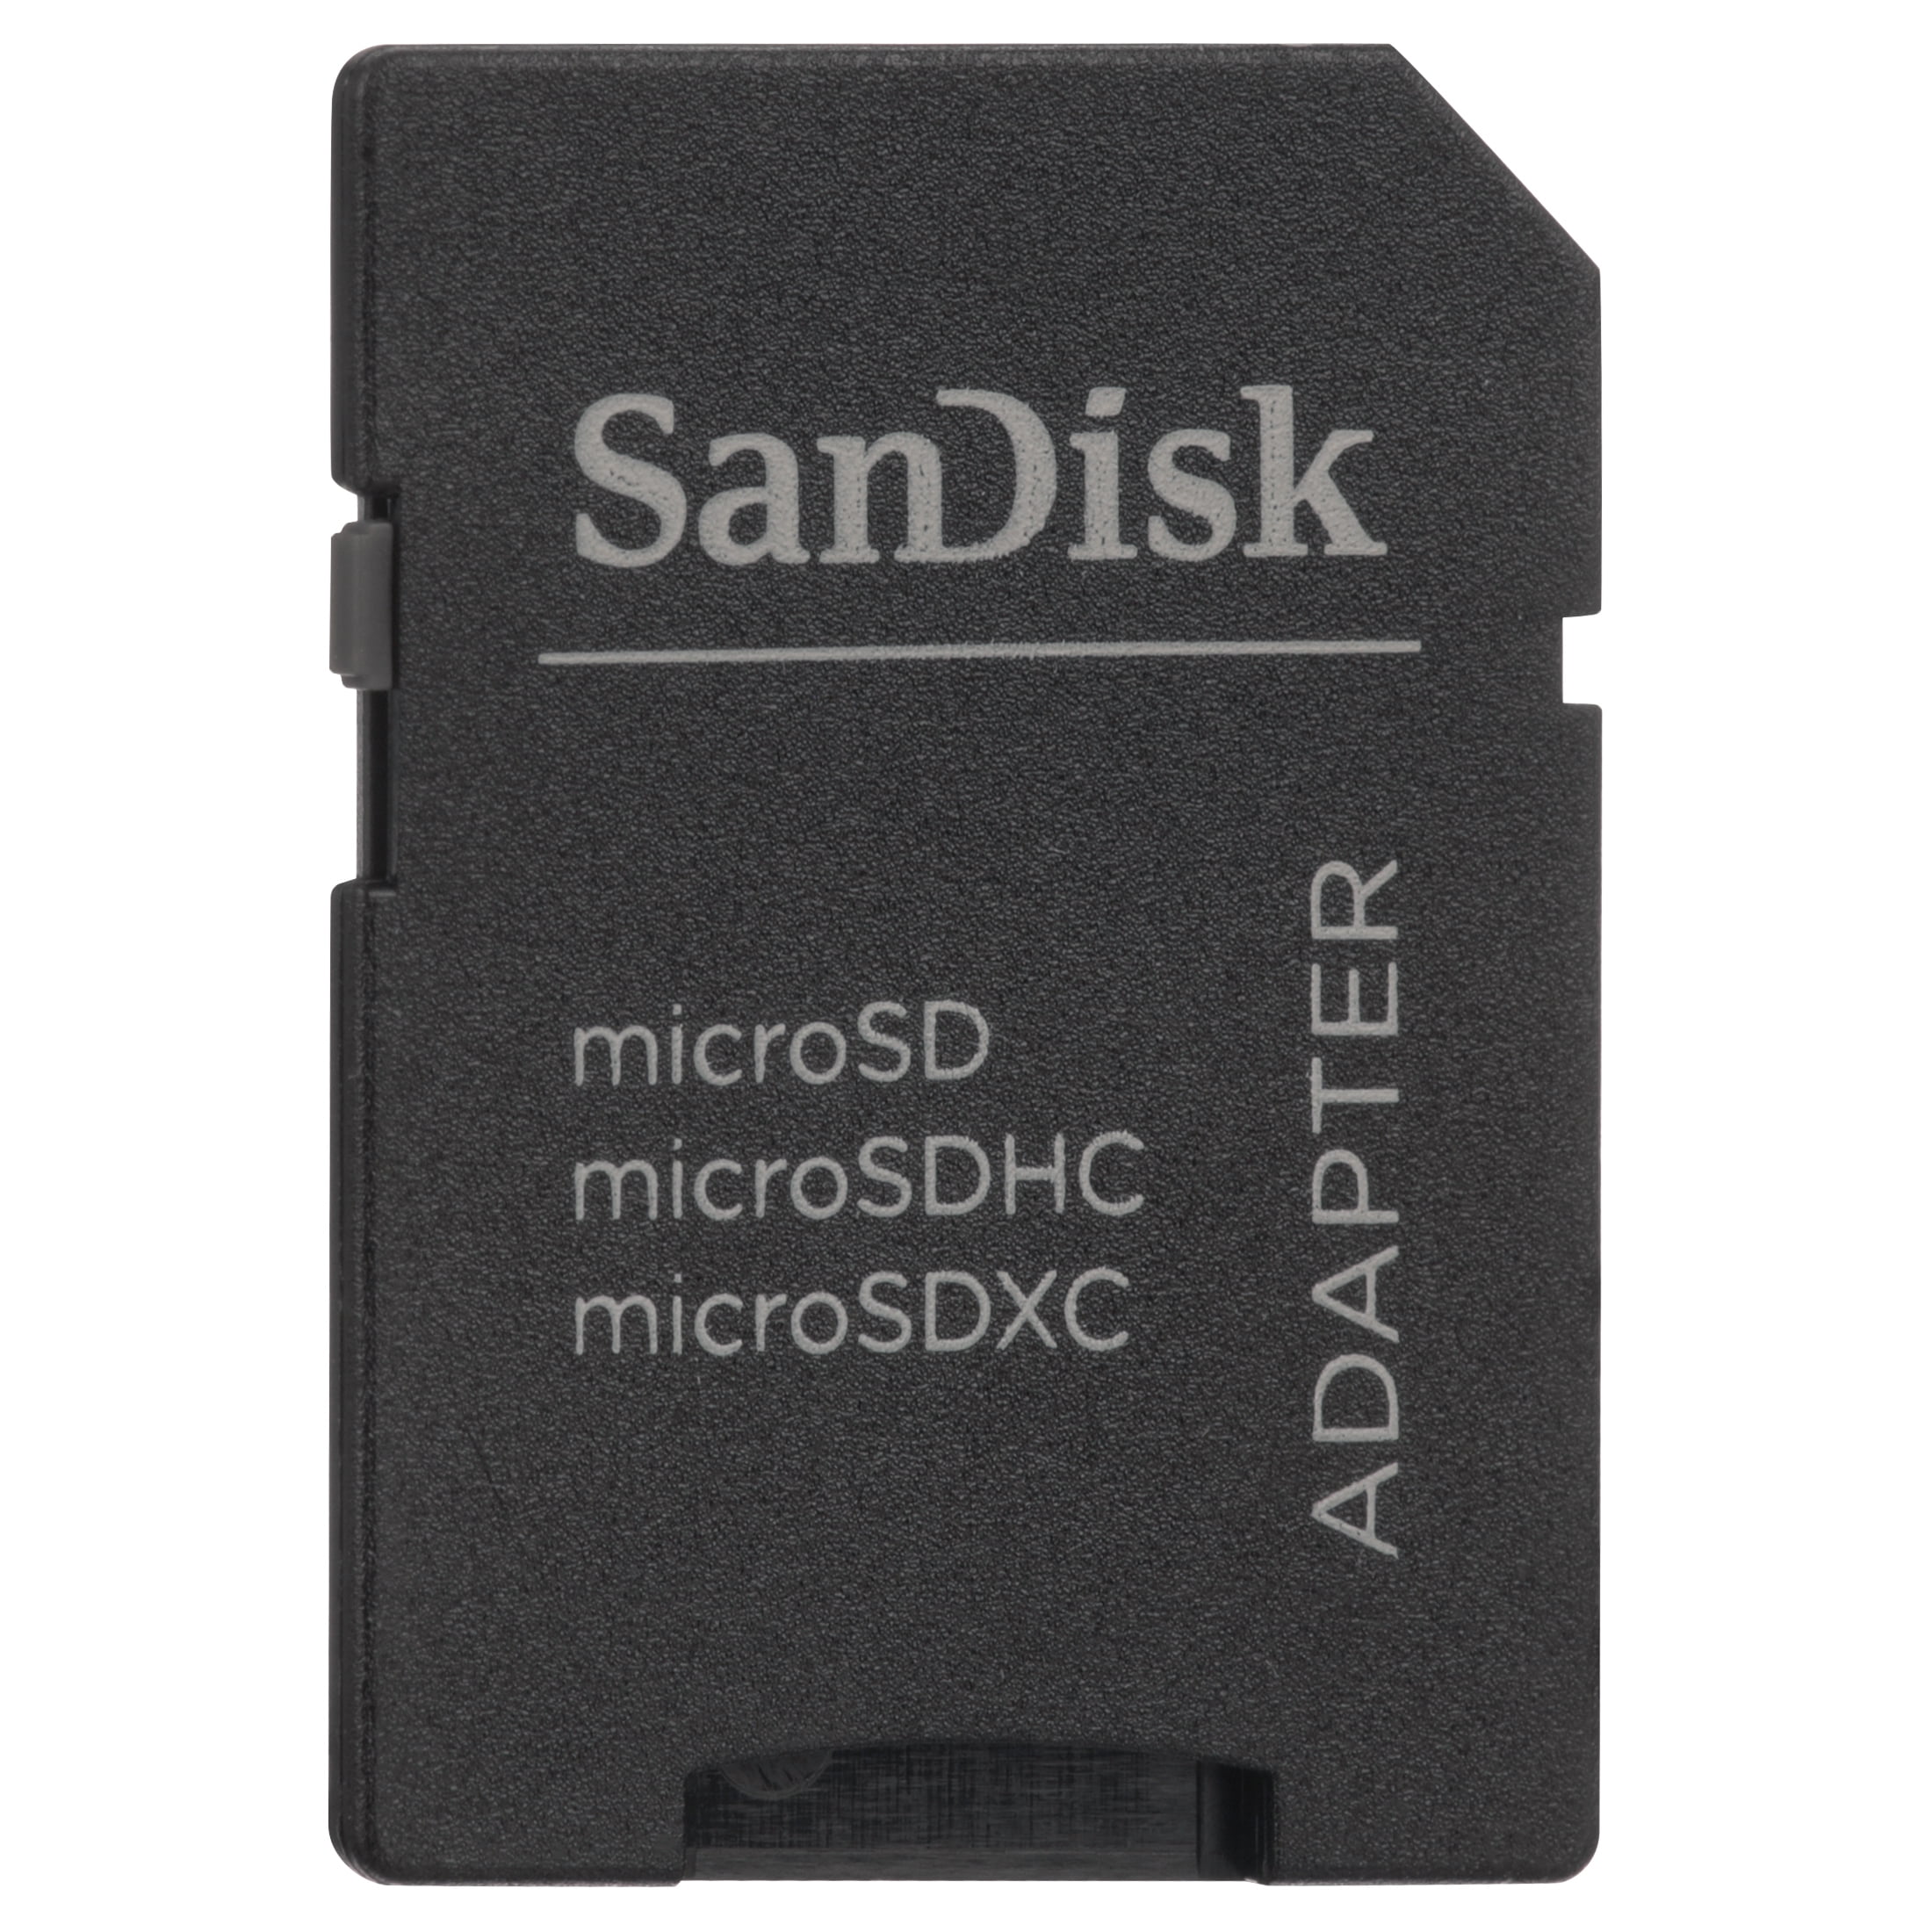 Imprisonment Tuesday unfathomable SanDisk 128GB Extreme microSDXC UHS-I Memory Card with Adapter - 160MB/s,  U3, V30, 4K UHD, A2, Micro SD Card - SDSQXA1-128G-GN6MA - Walmart.com